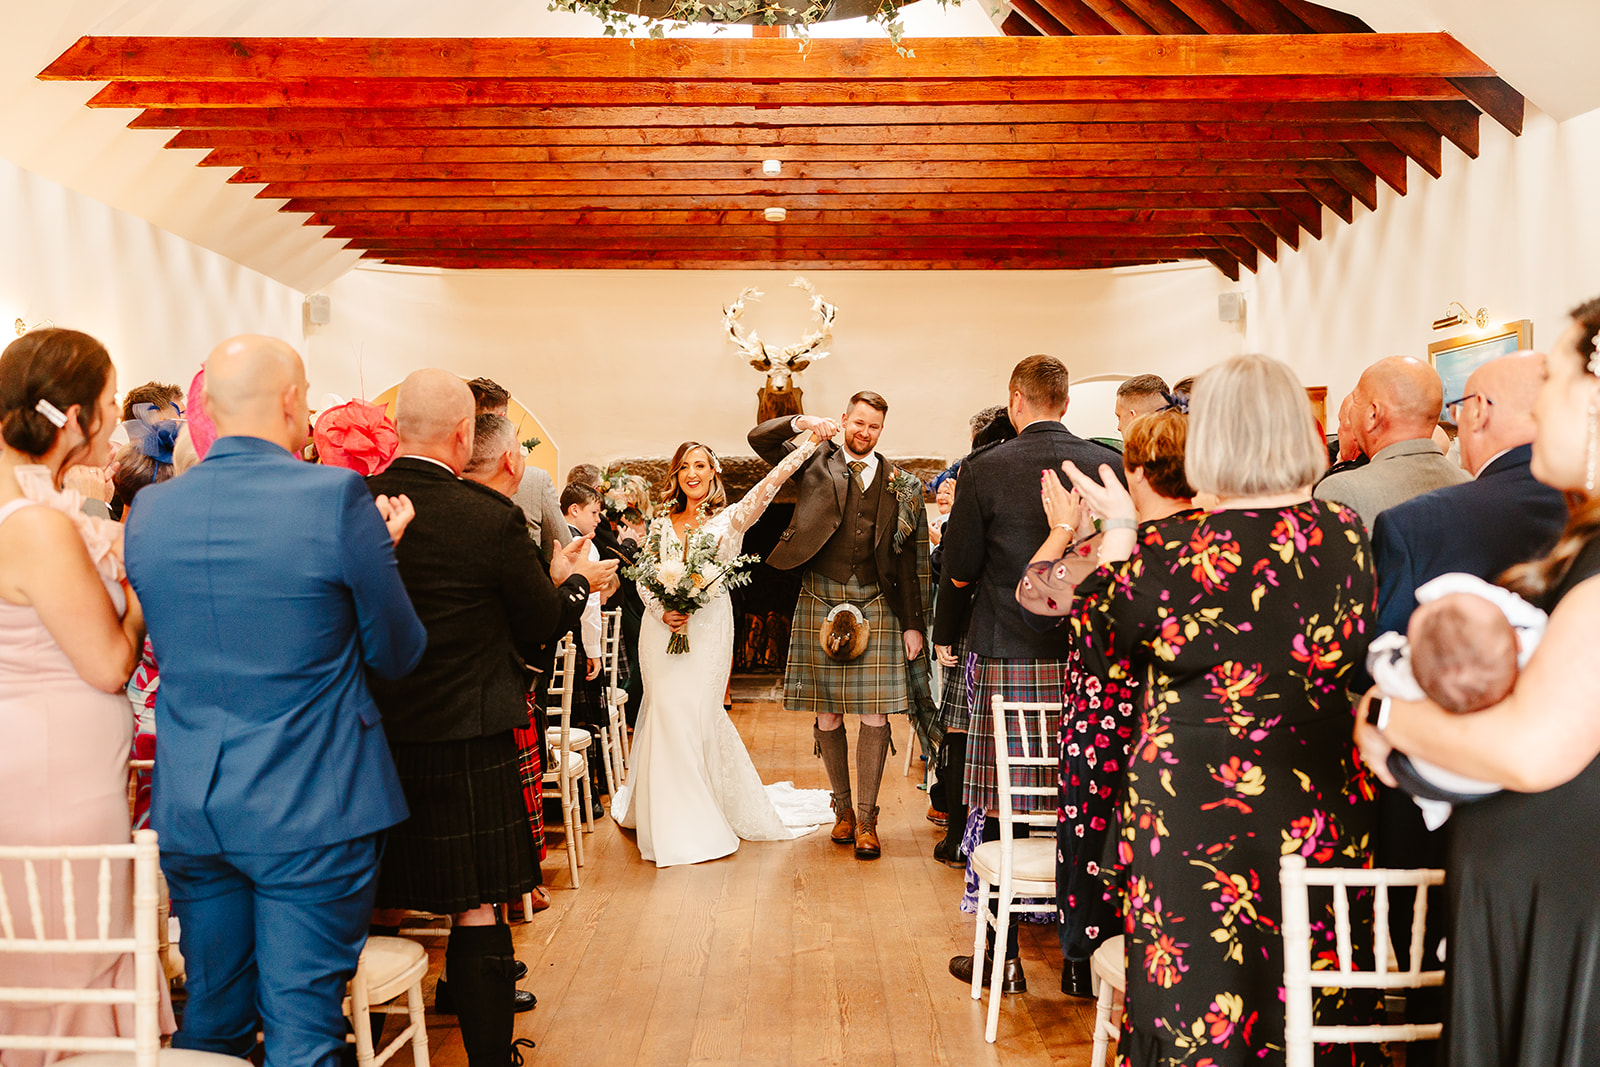 couple walk down the aisle after getting married at Aswanley wedding venue